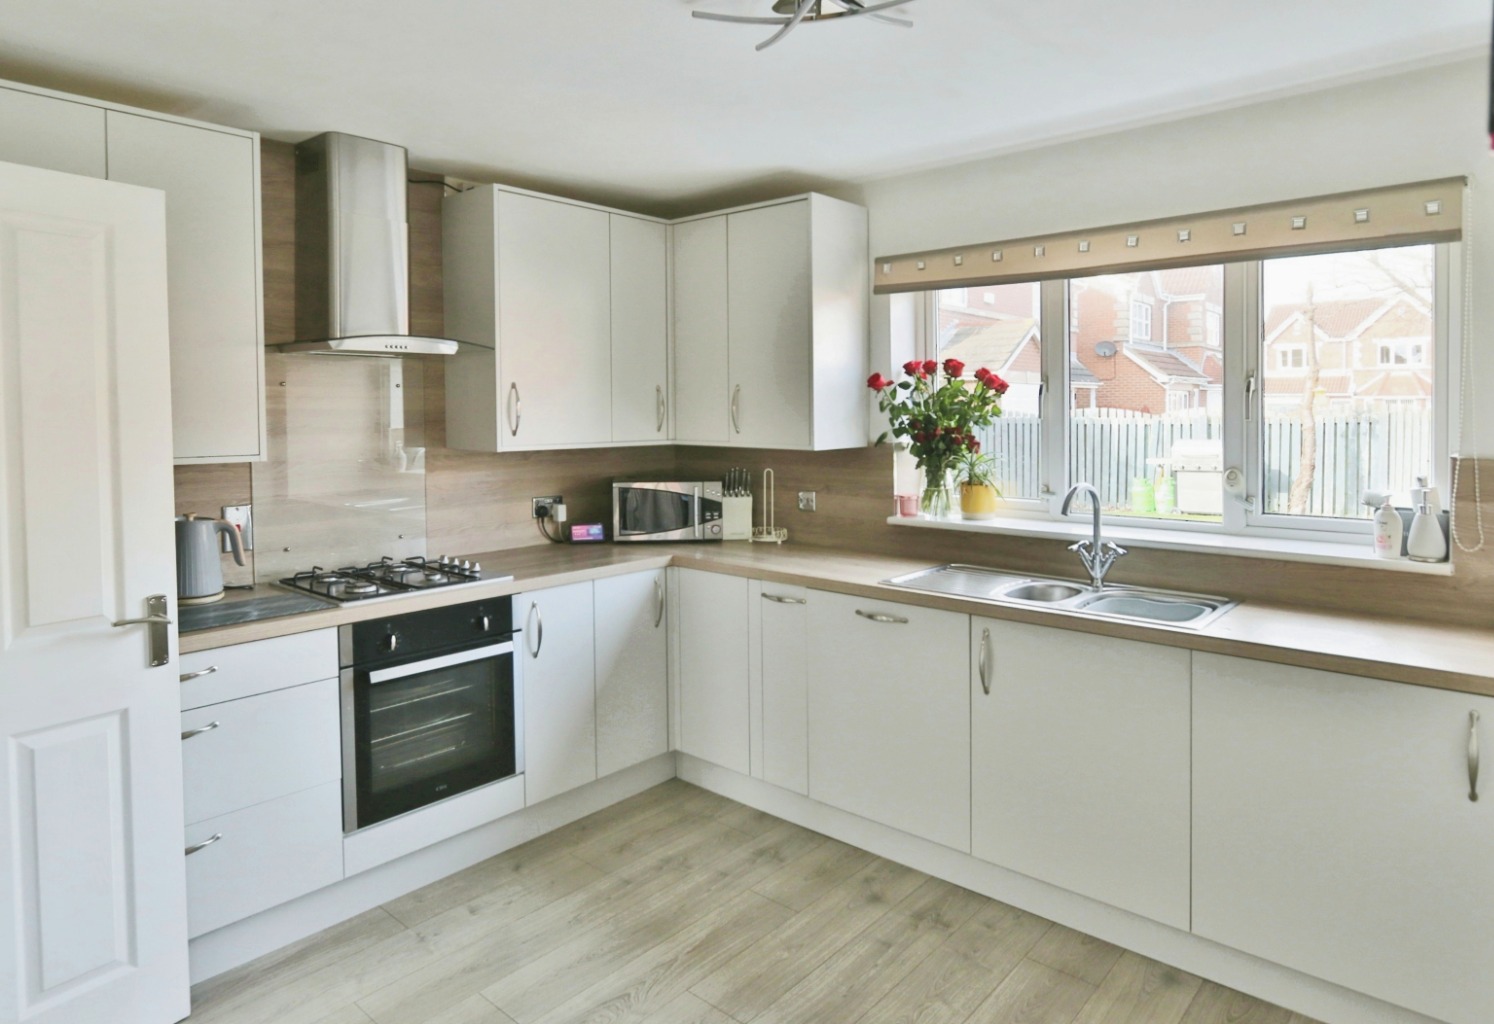 4 bed detached house for sale in Raleigh Drive, Hull - Property Image 1